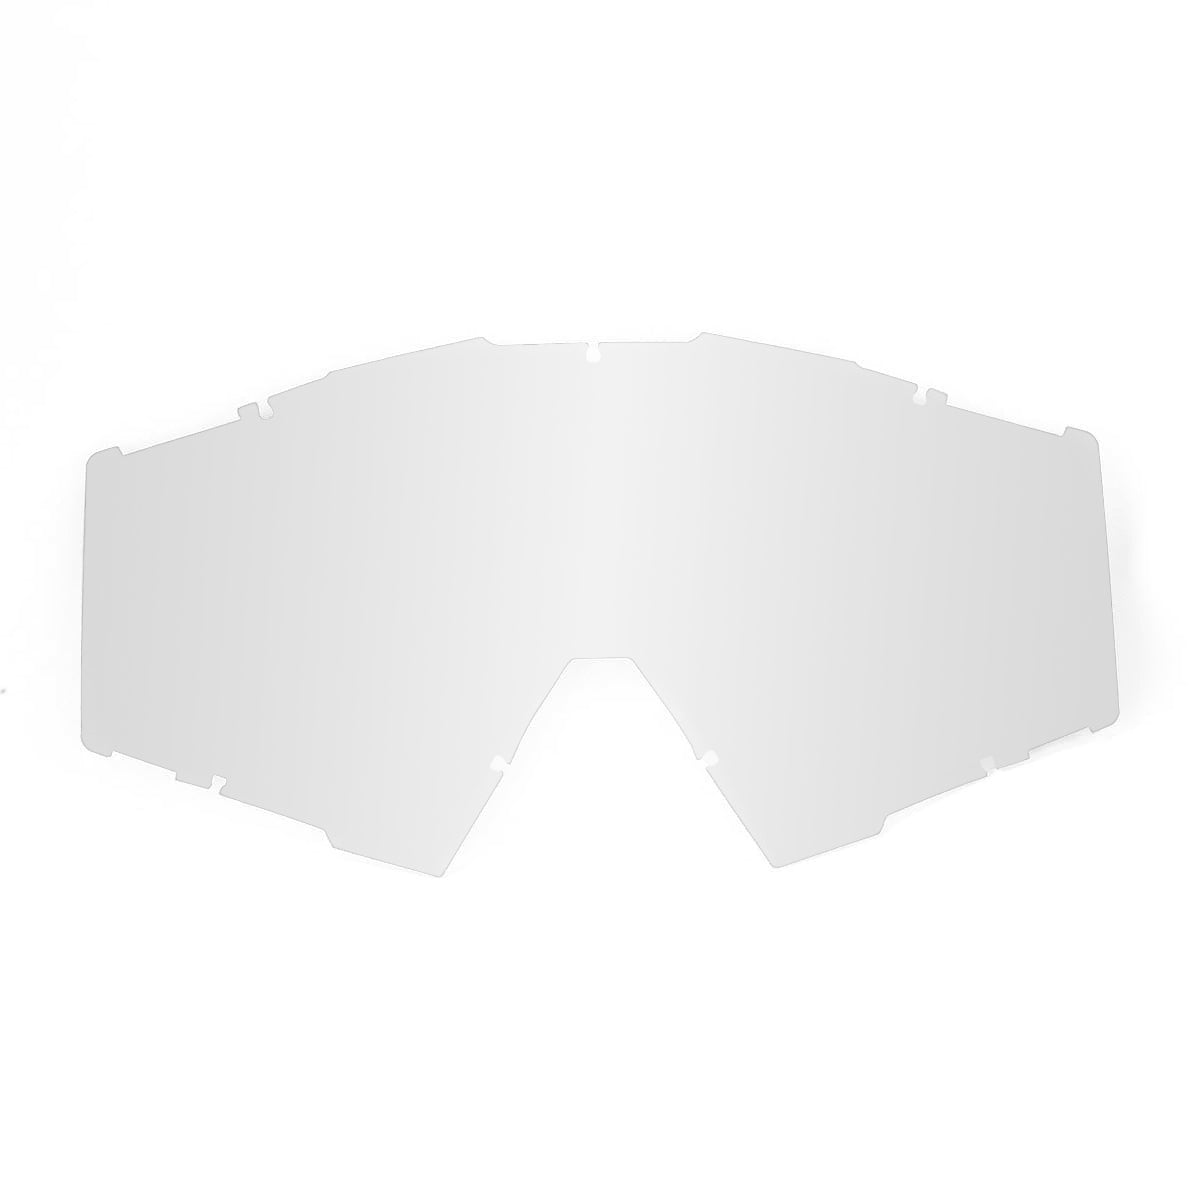 Voss One Mx Goggles Replacement Lenses